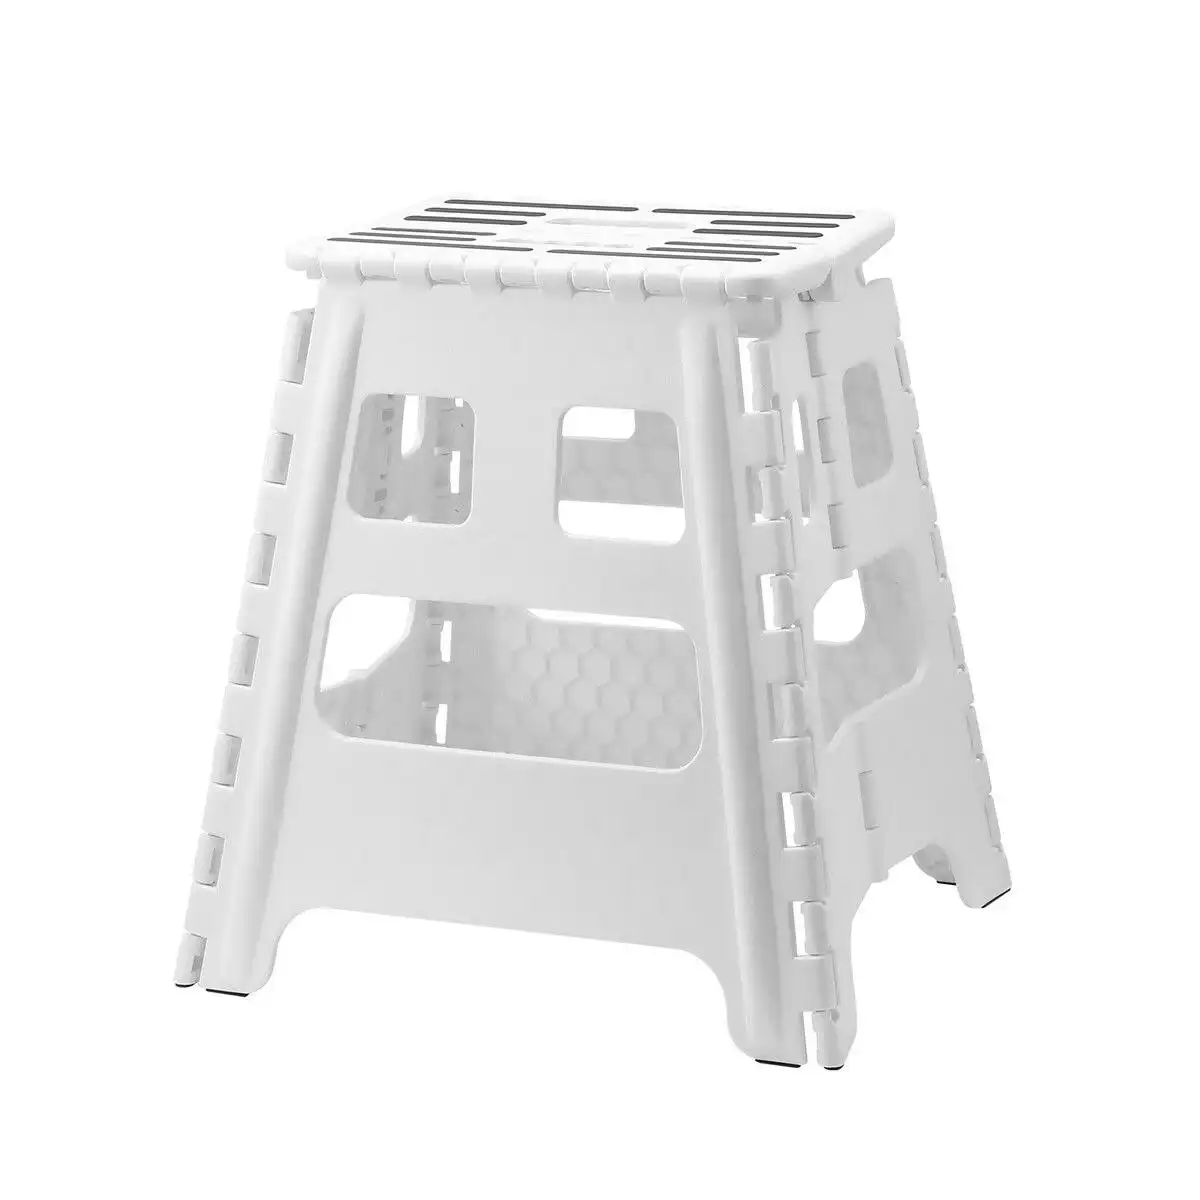 Ausway White Foldable Step Stool with Handle Footstool Plastic Childrens Chair Portable Helper Kitchen Potty Bathroom 29x22x39cm